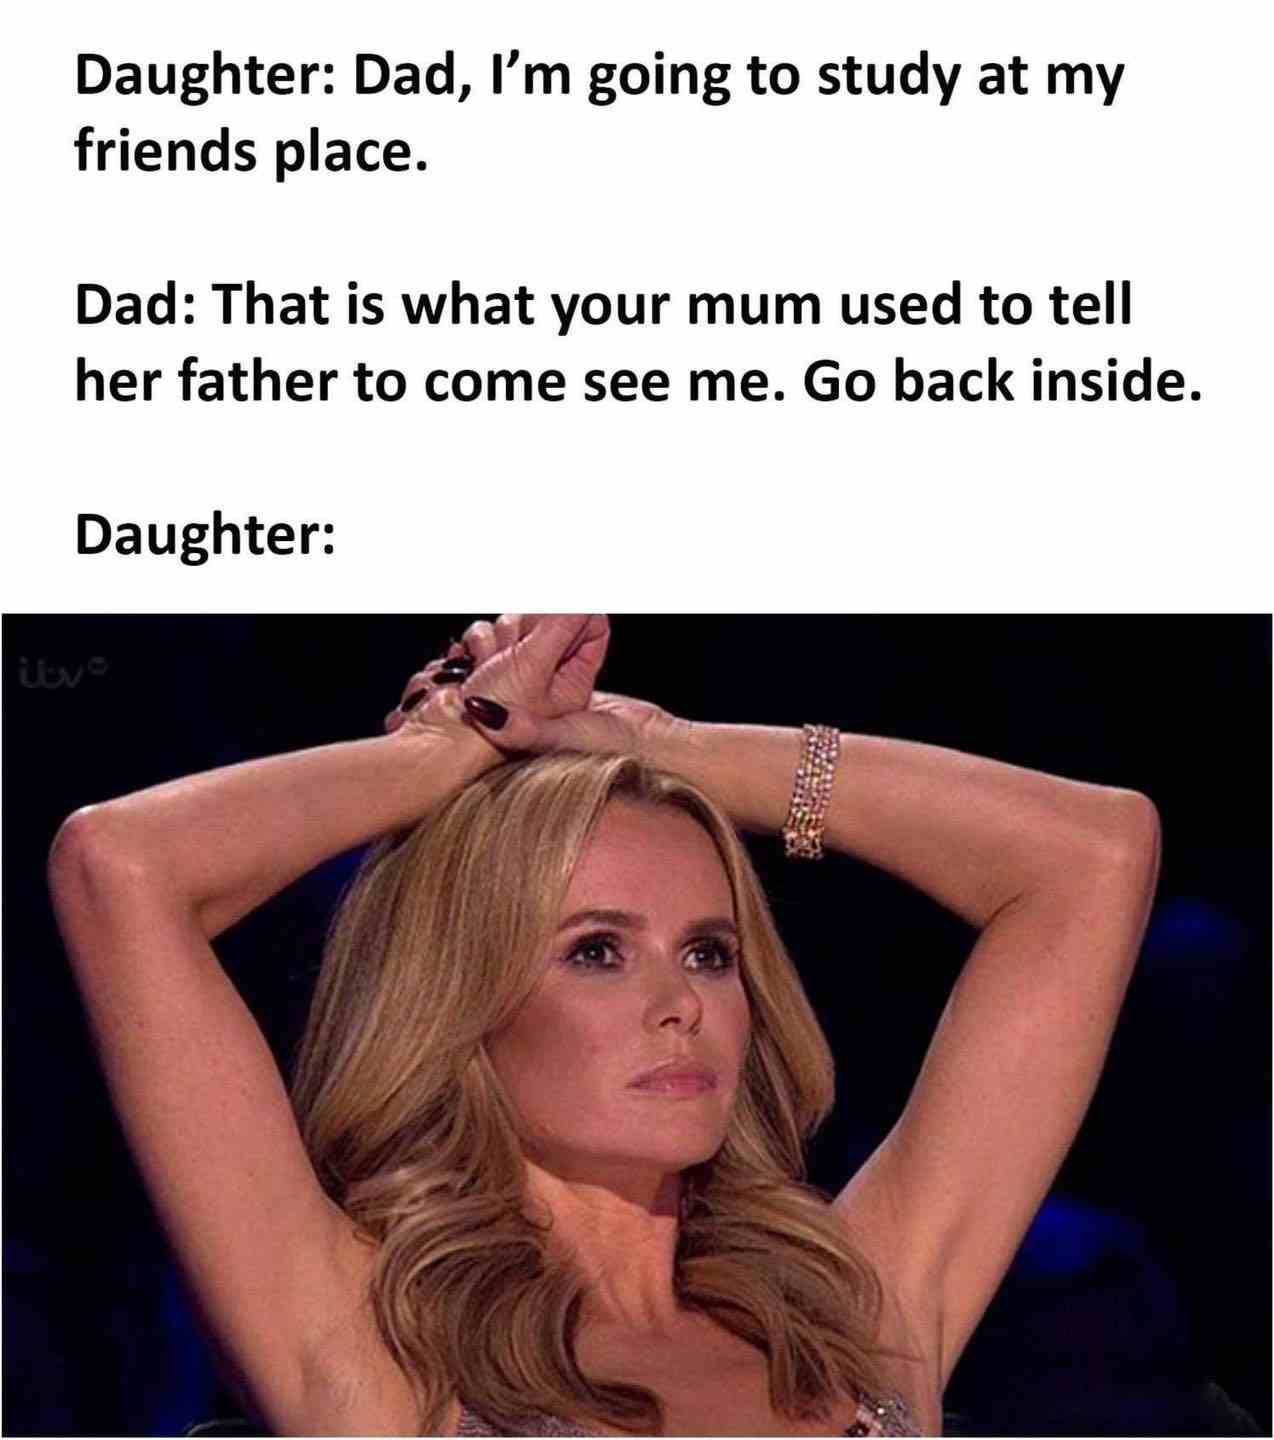 Dad, I'm going to study at my friends place